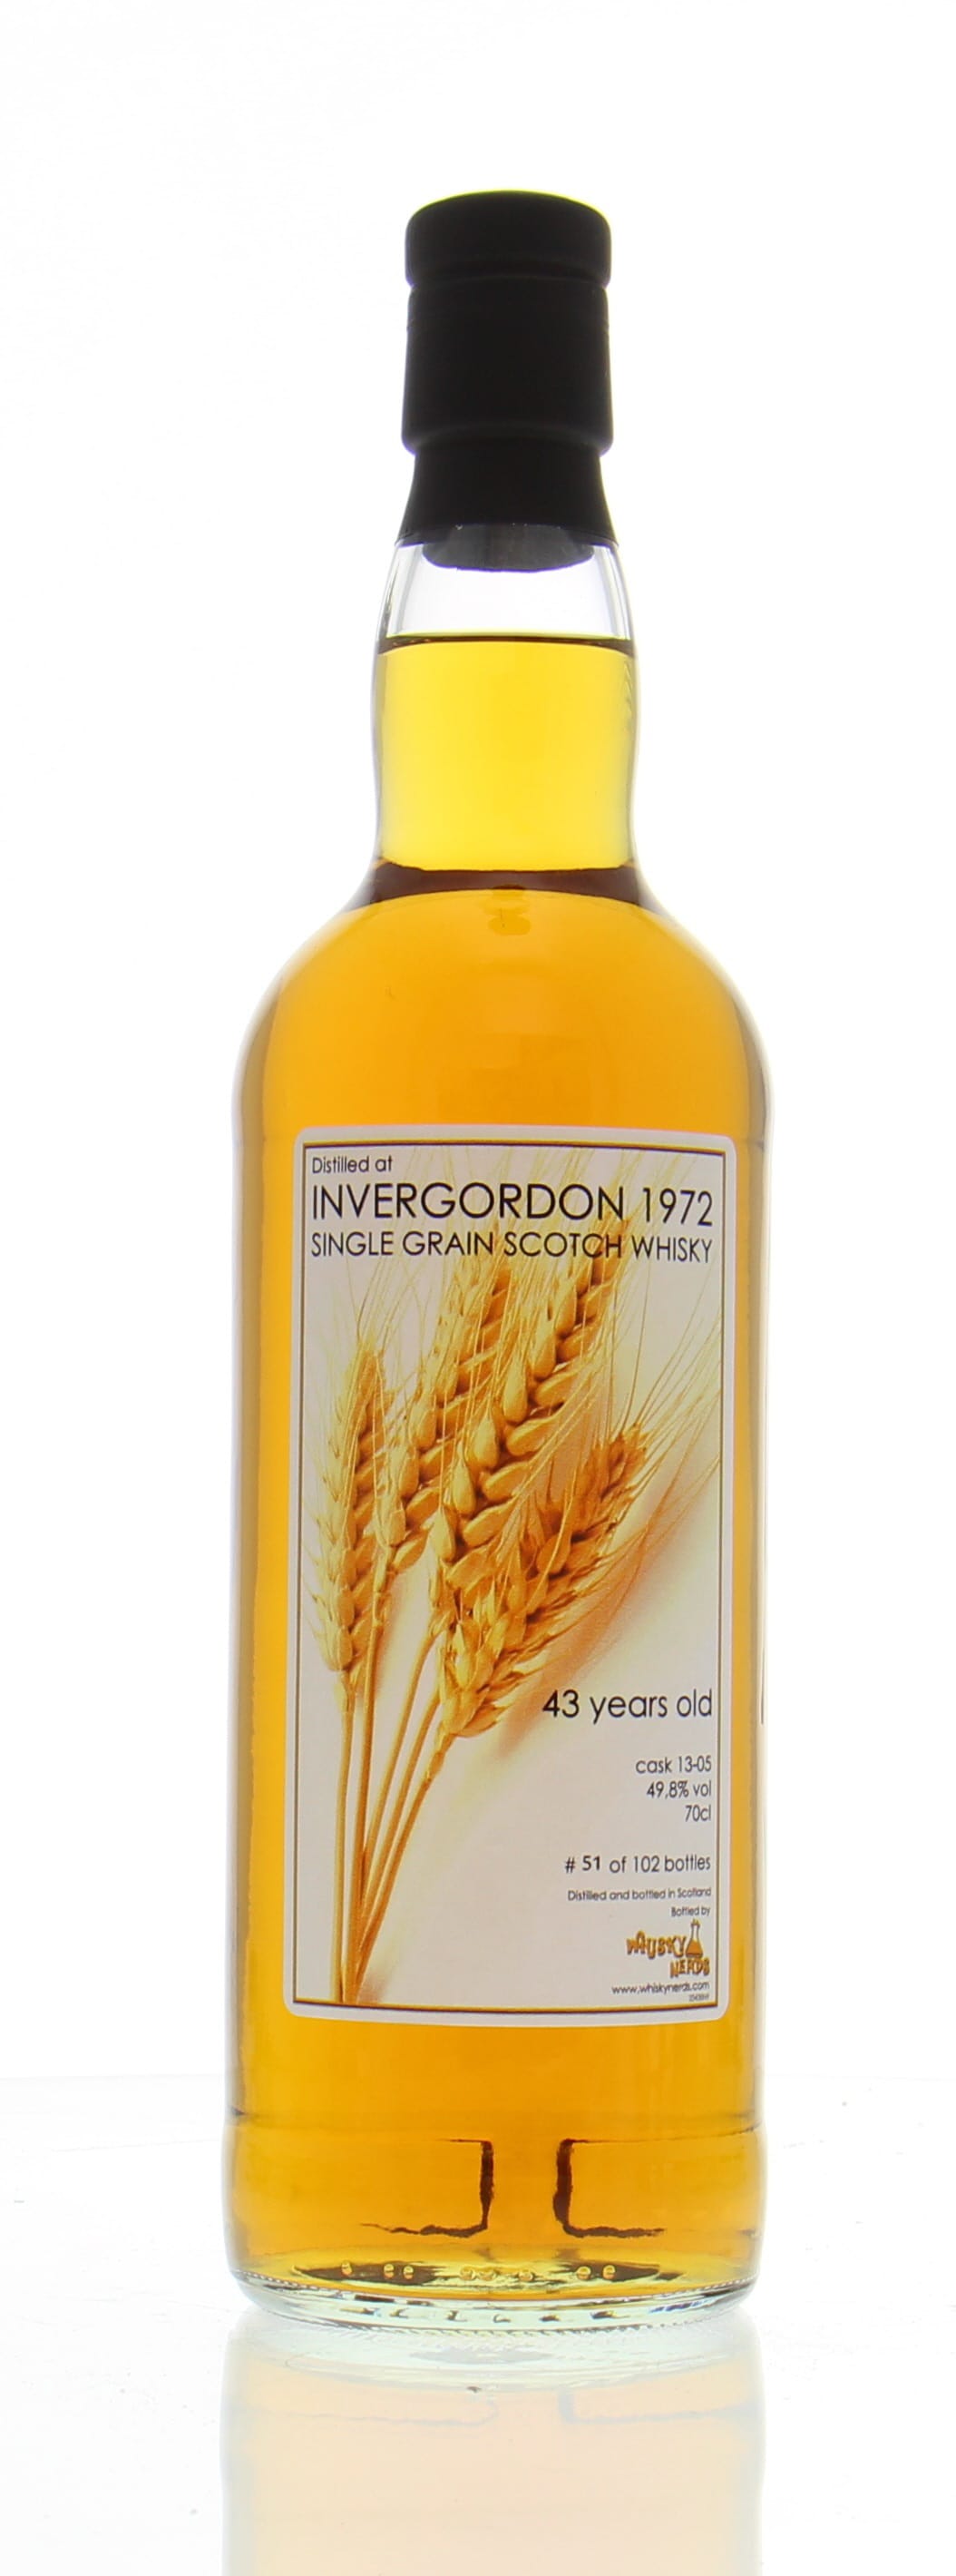 Invergordon - 43 Years Old WhiskyNerds Cask:13-05 49.8% 1972 Perfect